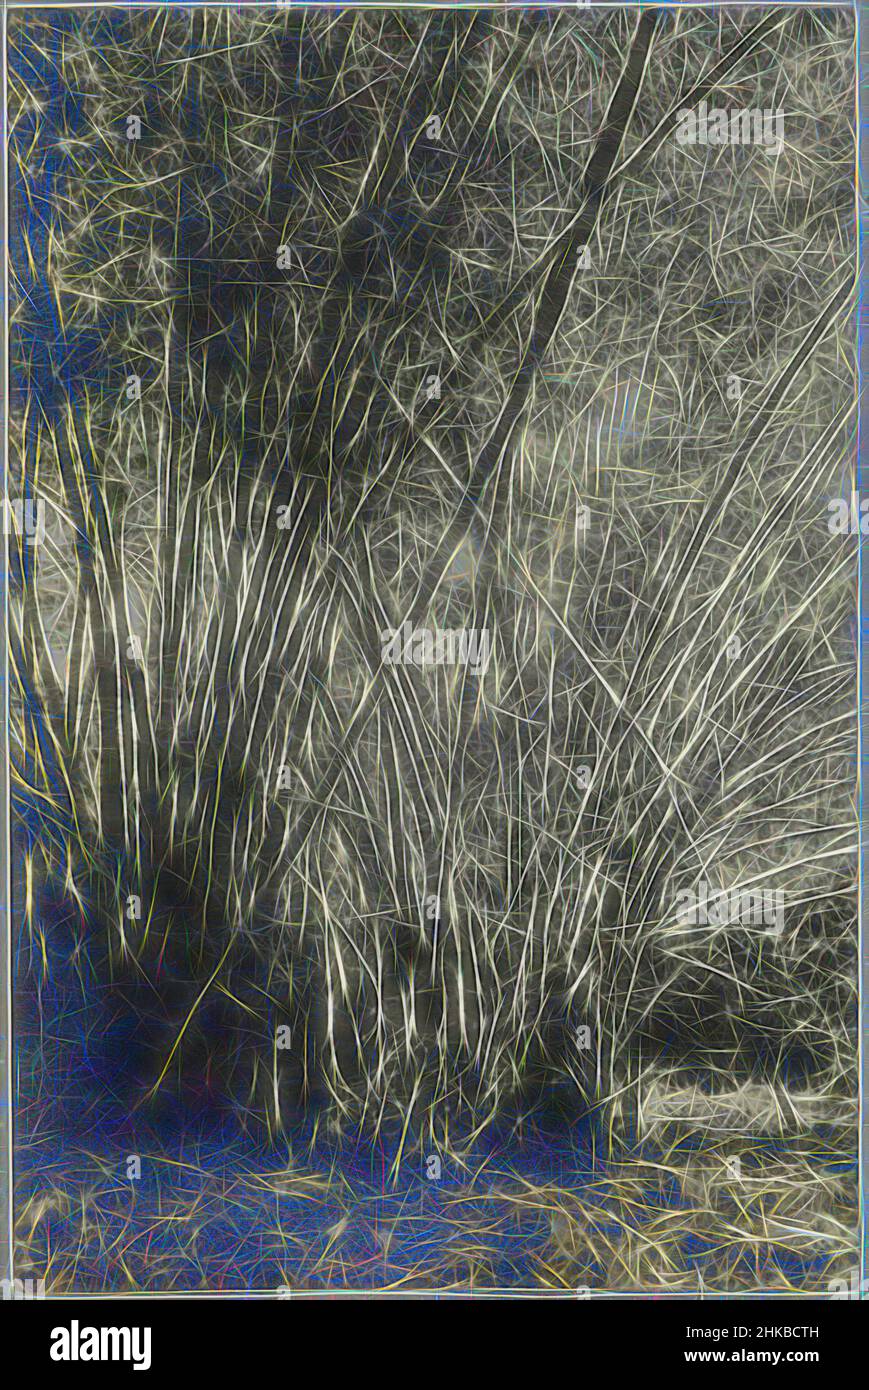 Inspired by Bamboo on Tourtonne, Tall bamboo bushes growing on the Tourtonne plantation. Part of the photo album Souvenir de Voyage (part 1), about the life of the Doijer family in and around the plantation Ma Retraite in Suriname in the years 1906-1913., Hendrik Doijer, Suriname, 1906 - 1913, Reimagined by Artotop. Classic art reinvented with a modern twist. Design of warm cheerful glowing of brightness and light ray radiance. Photography inspired by surrealism and futurism, embracing dynamic energy of modern technology, movement, speed and revolutionize culture Stock Photo